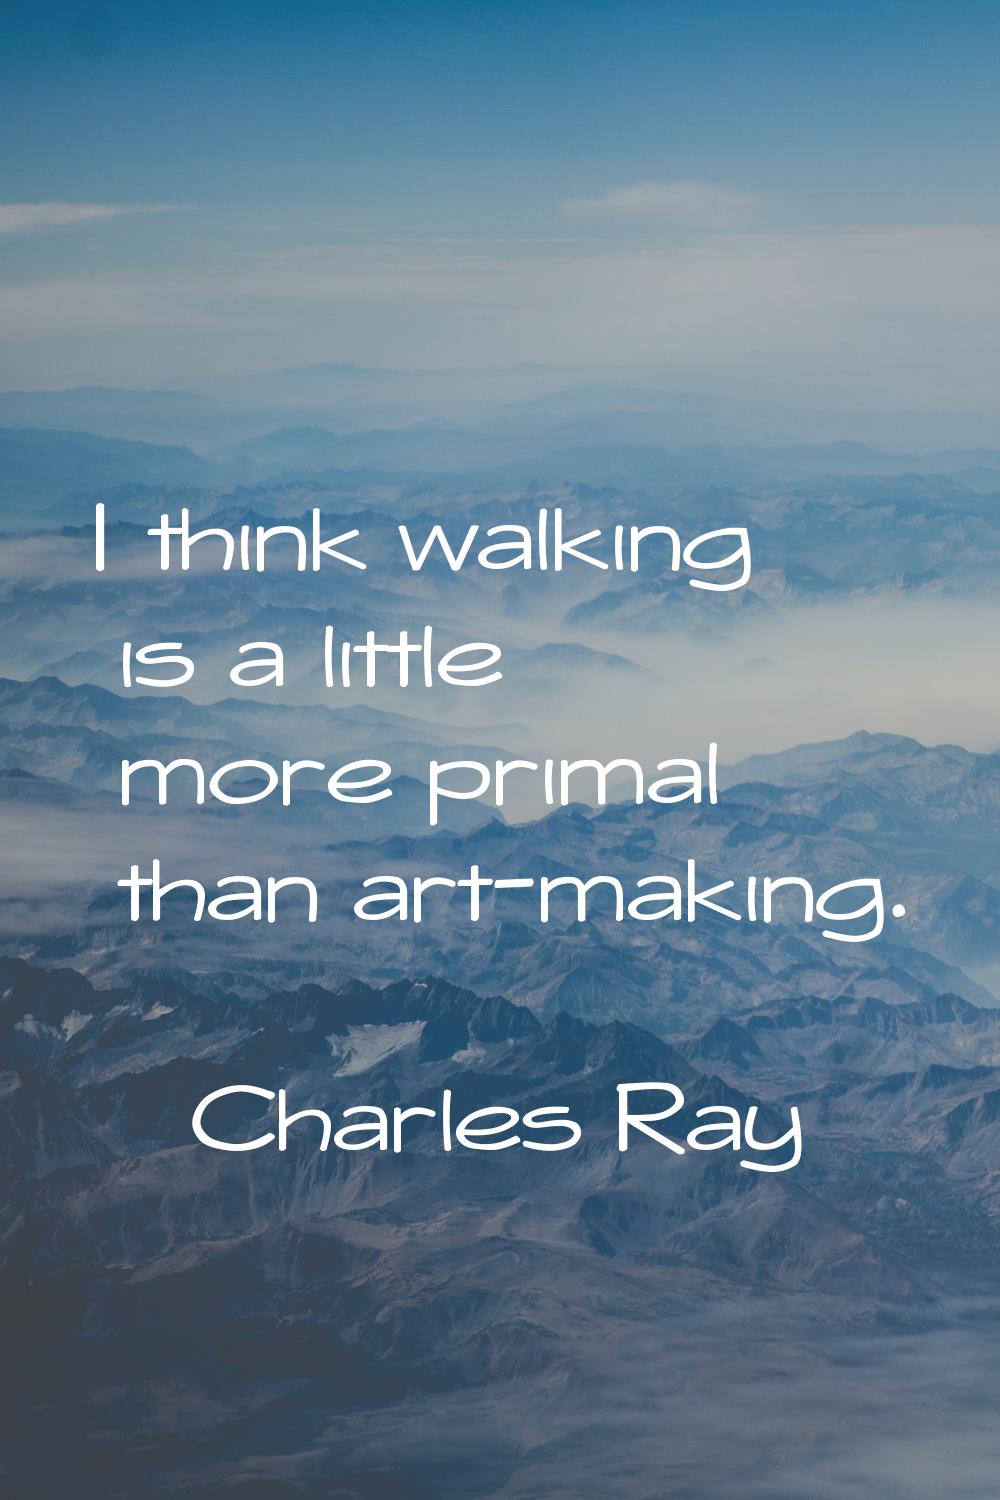 I think walking is a little more primal than art-making.